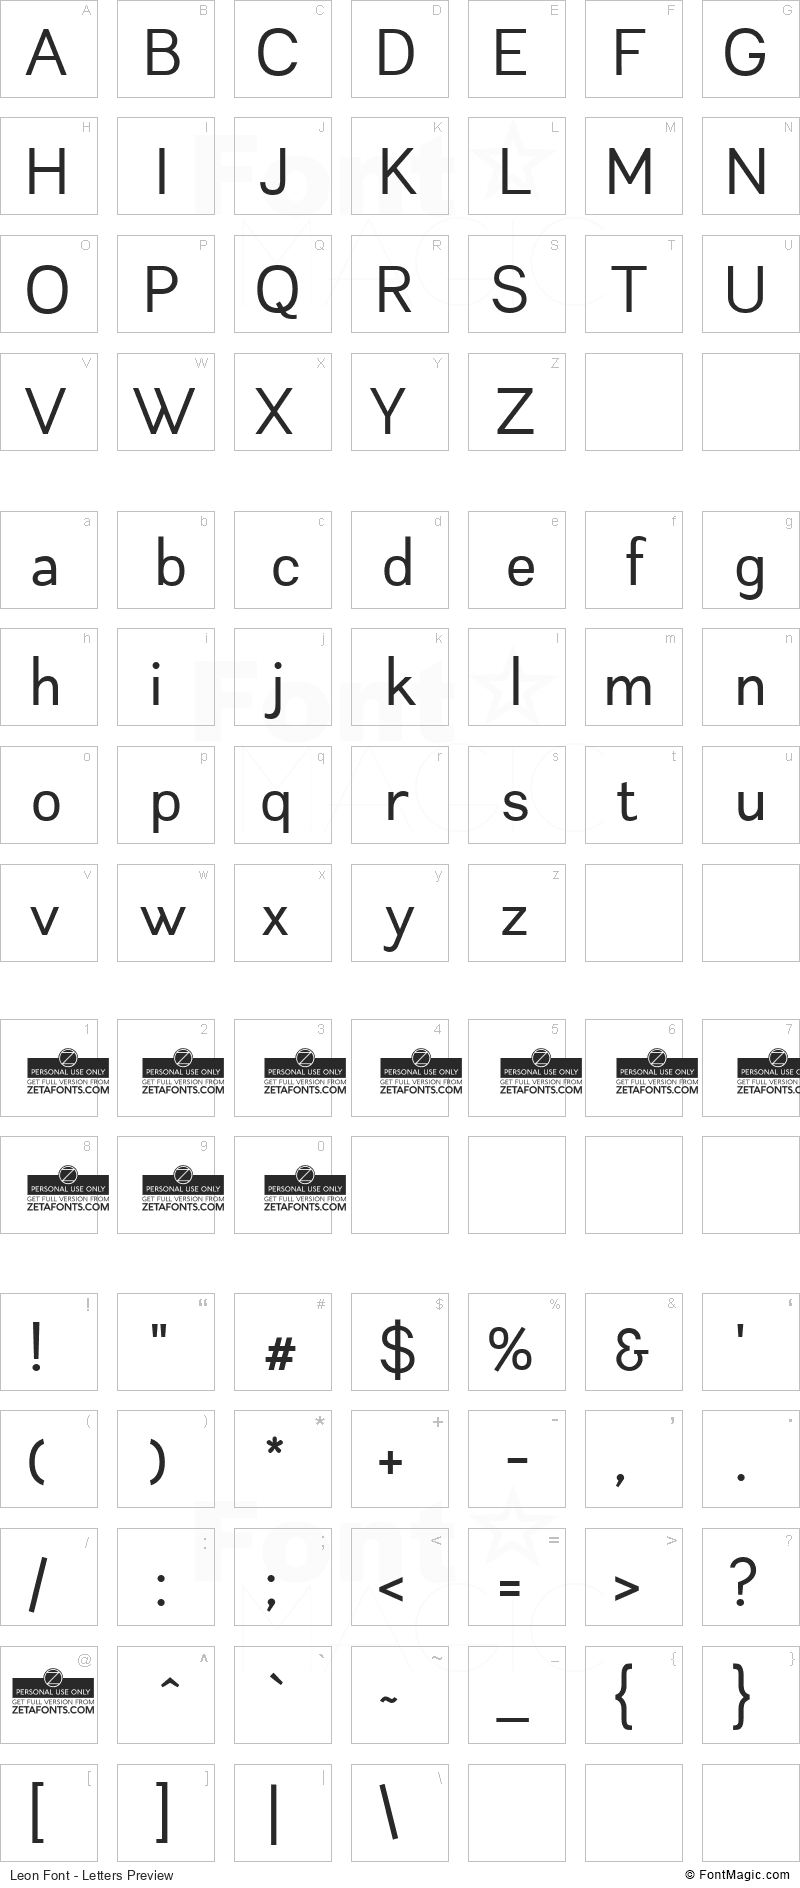 Leon Font - All Latters Preview Chart